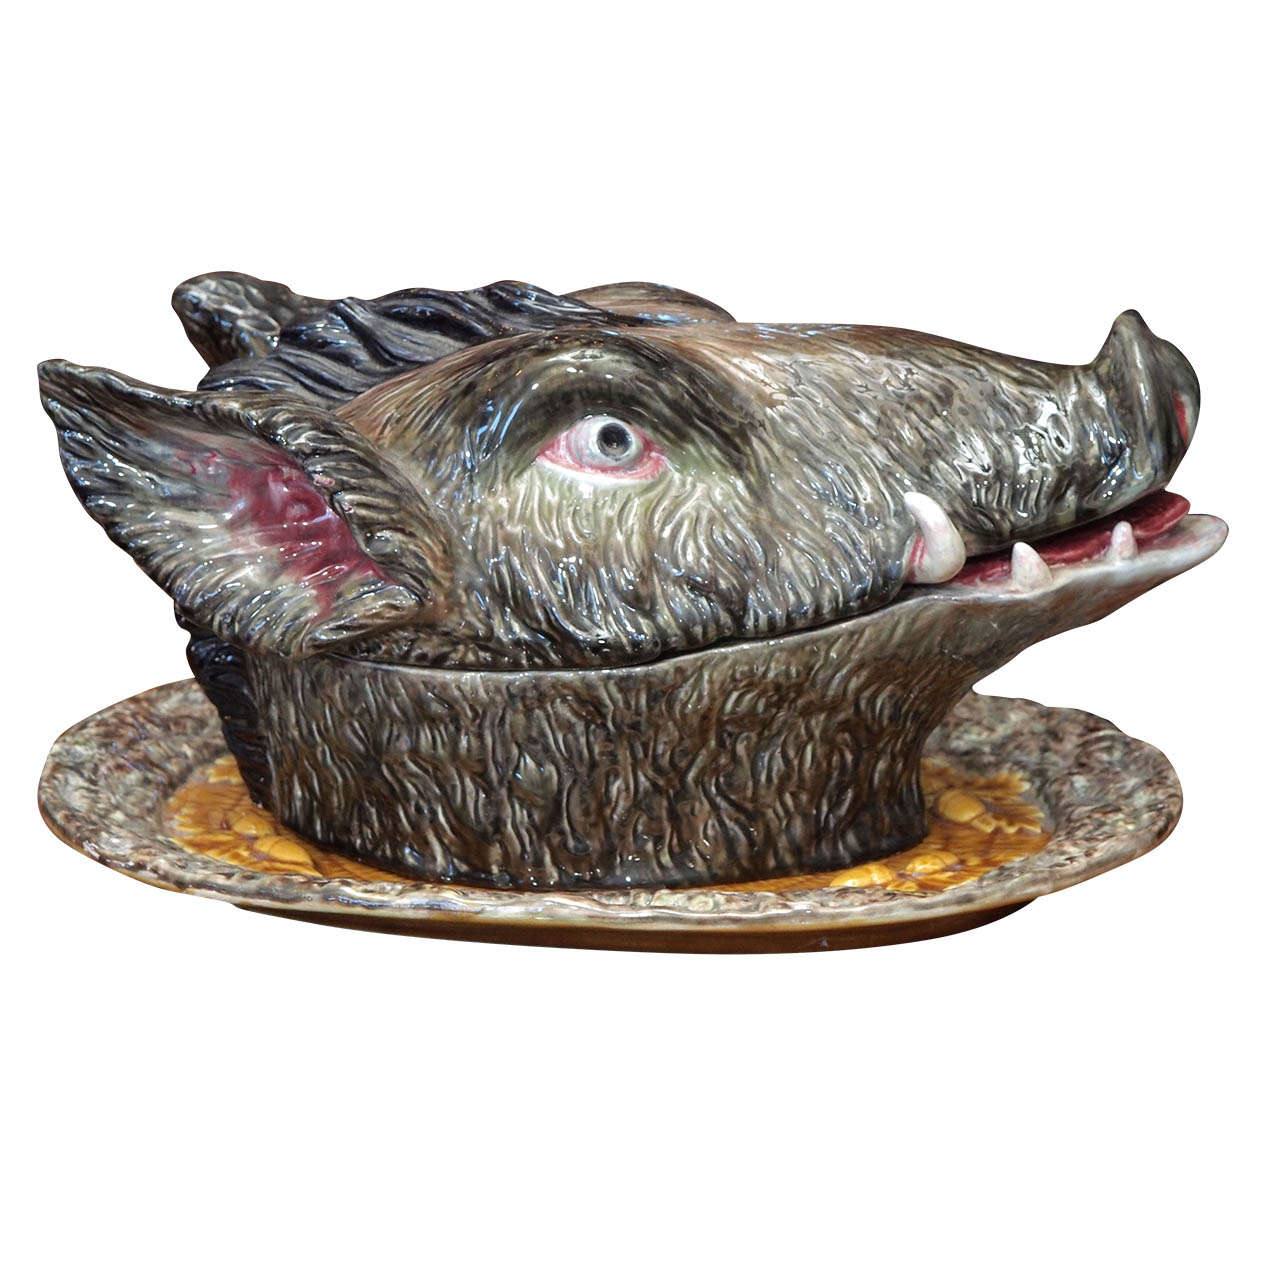 Portuguese Majolica Soup Tureen in the form of a Boars Head on Platter